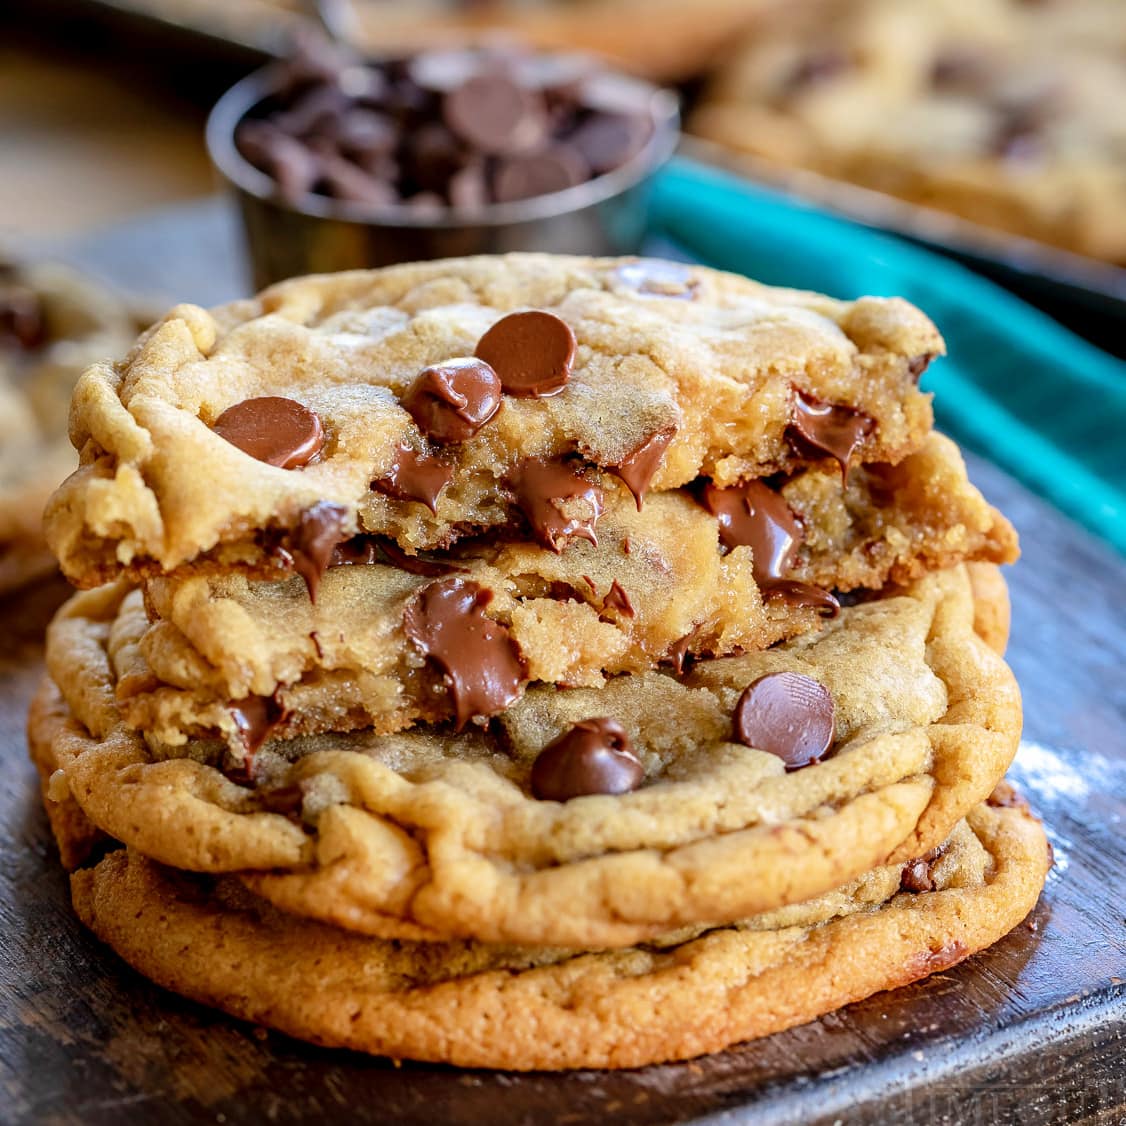 Soft and Chewy Chocolate Chip Cookie Cake Recipe